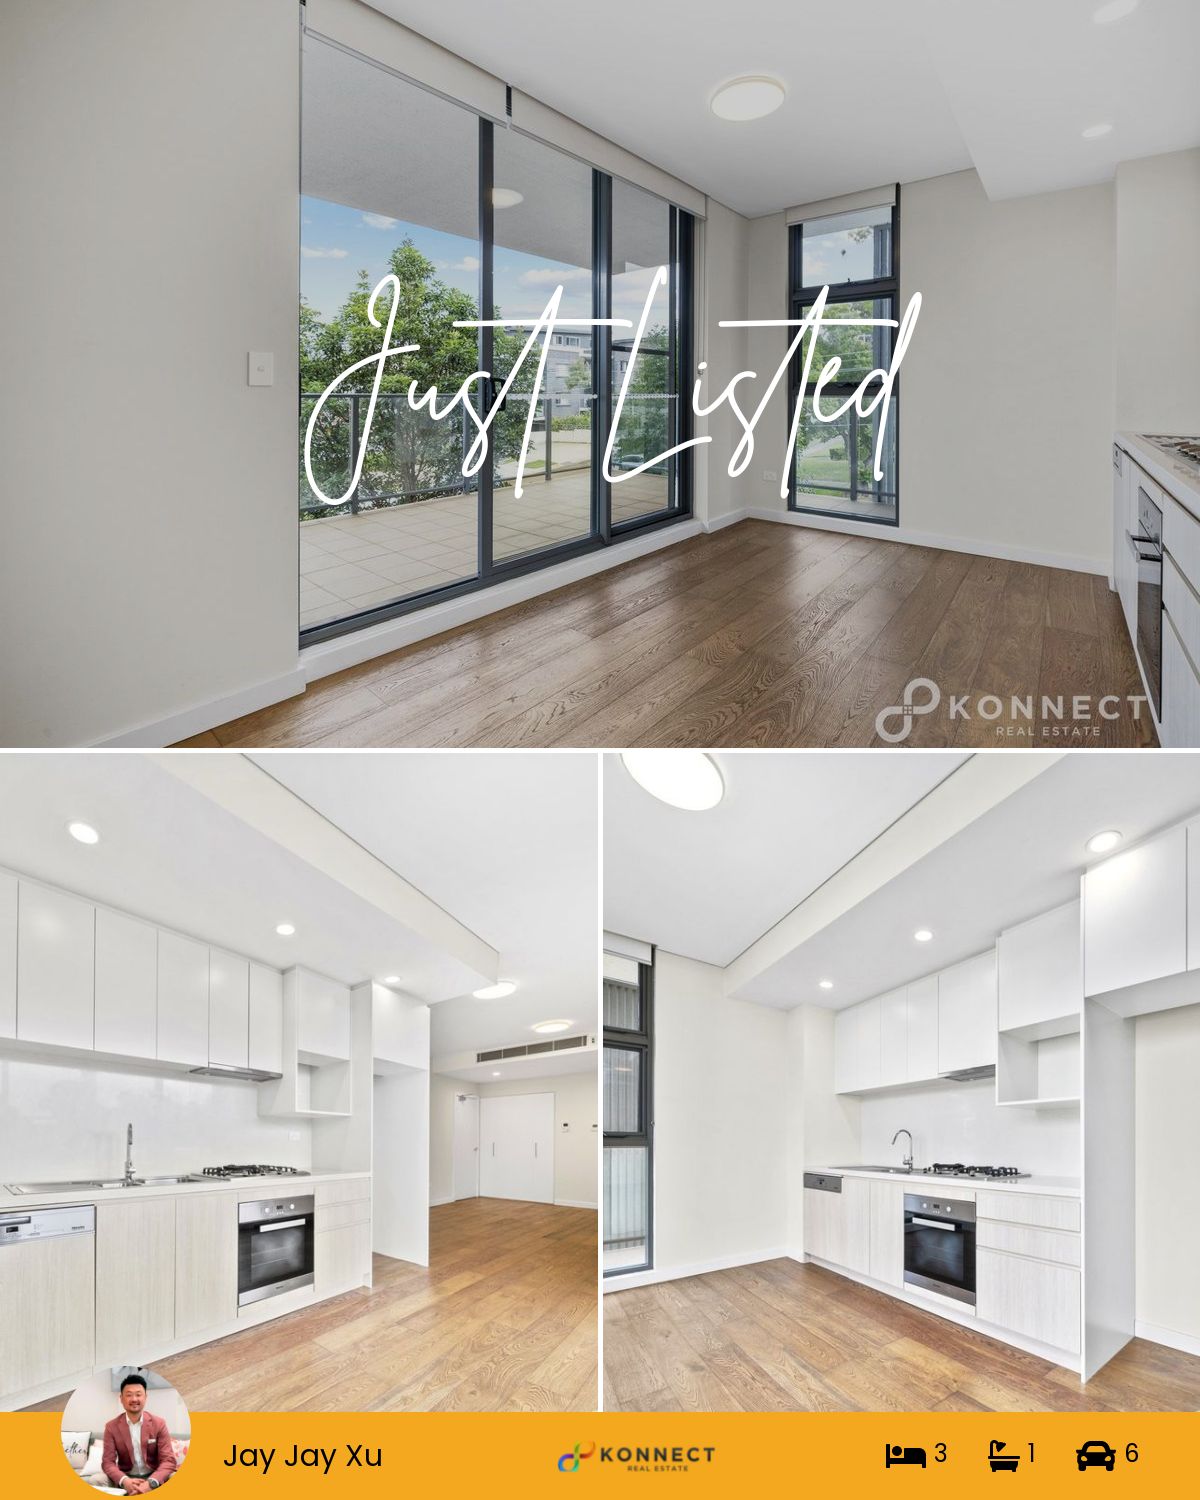 201/31 Forest Grove, Epping, NSW 2121 | Realty.com.au